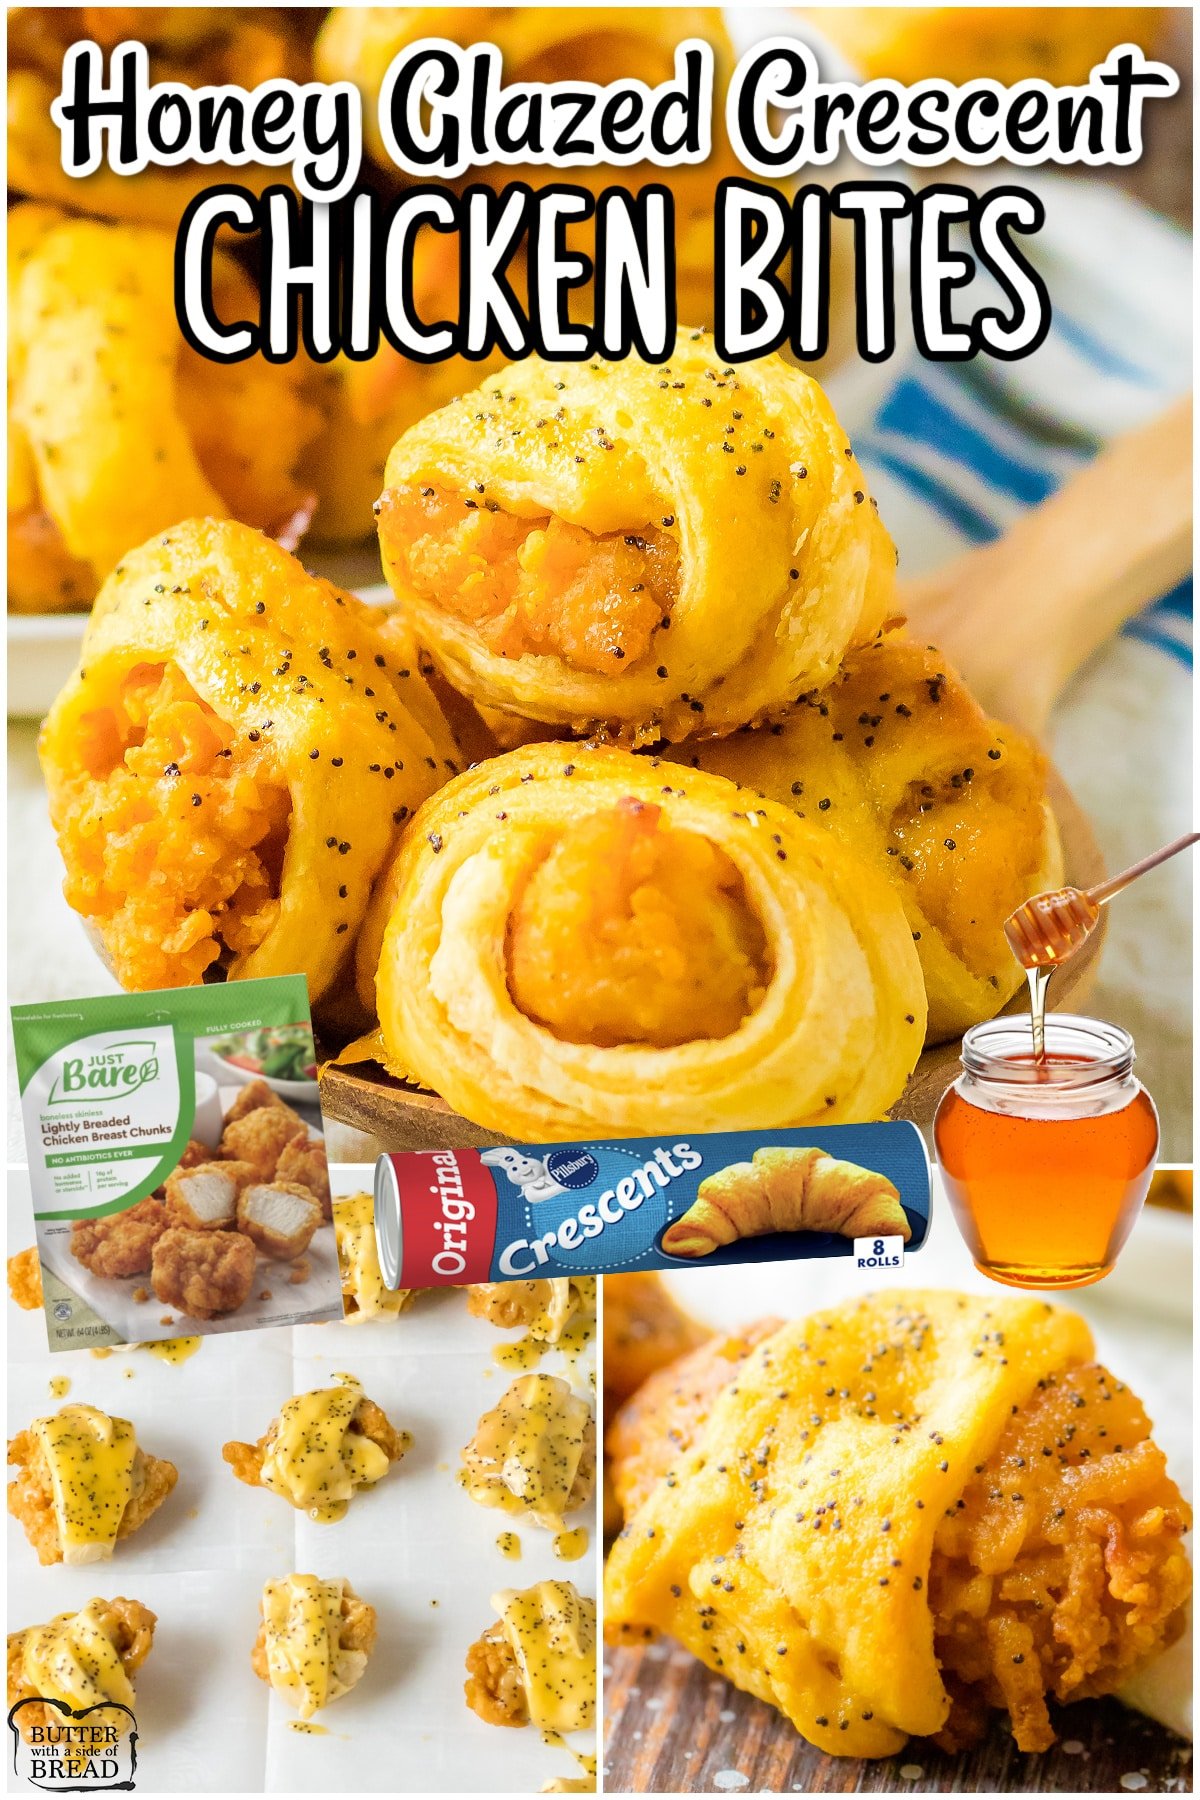 Honey Glazed Chicken Crescent Bites are popcorn chicken wrapped in buttery crescent rolls, then brushed with a sweet honey mustard glaze! Perfect savory appetizer that everyone loves!